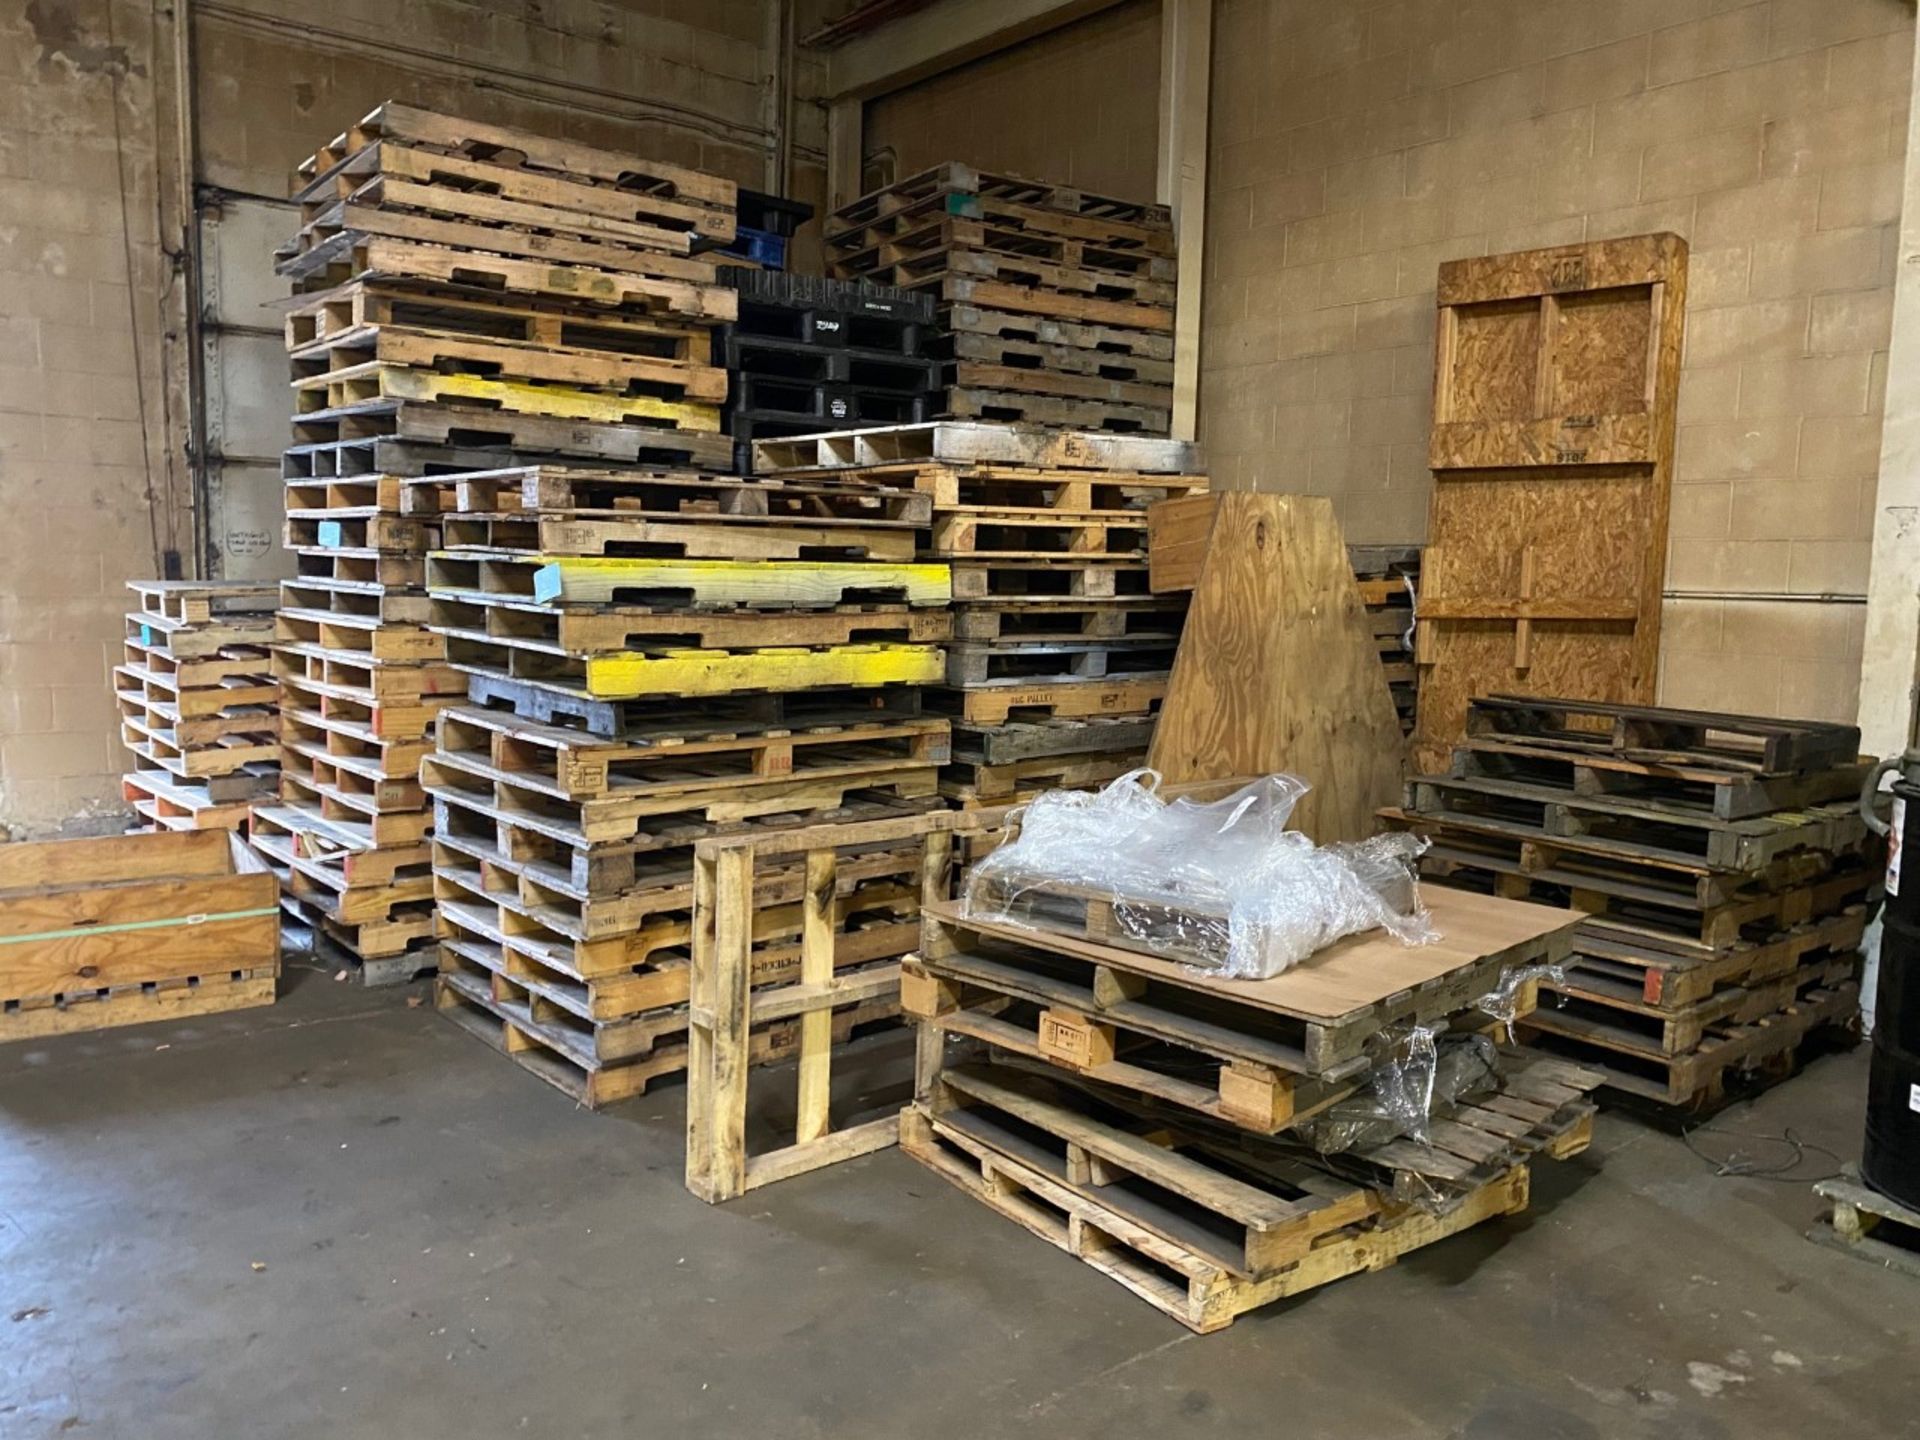 Lot-Approximately 180-200 Wood Pallets in (3) Rows, 40"-44" x 48" Approximate Dimensions - Image 3 of 5